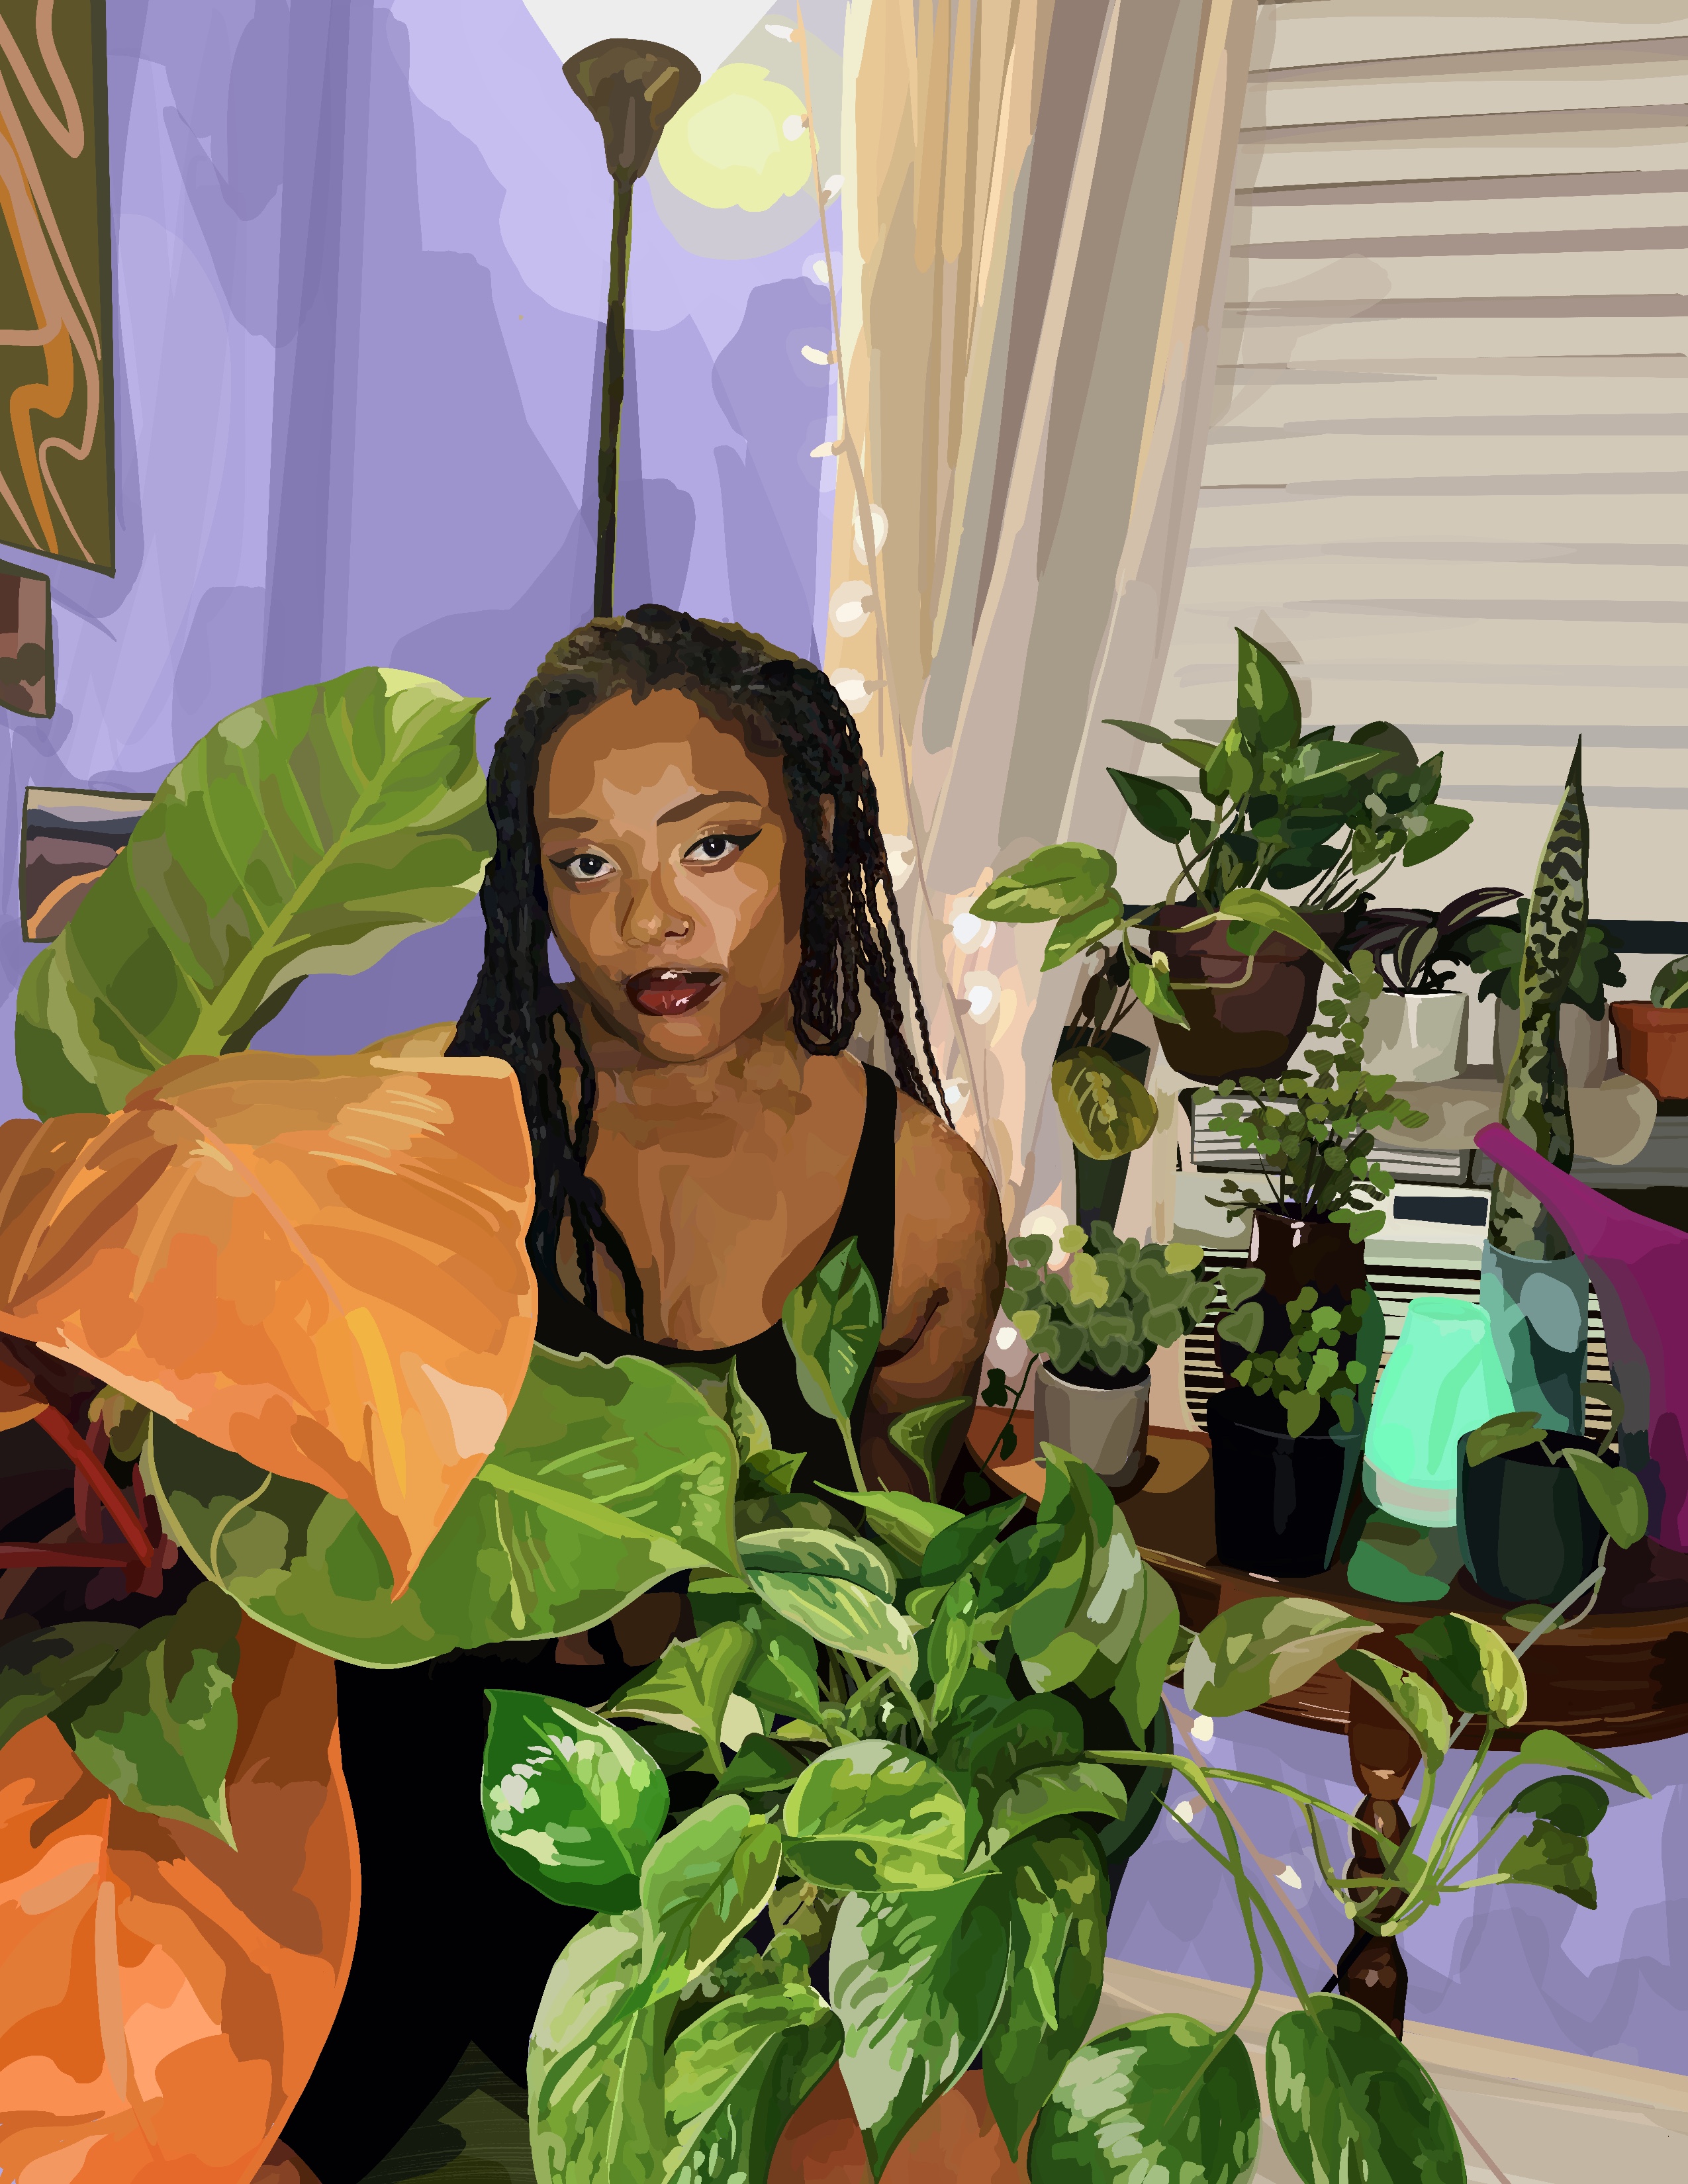 woman surrounded by plants in a purple room, posing for a portrait